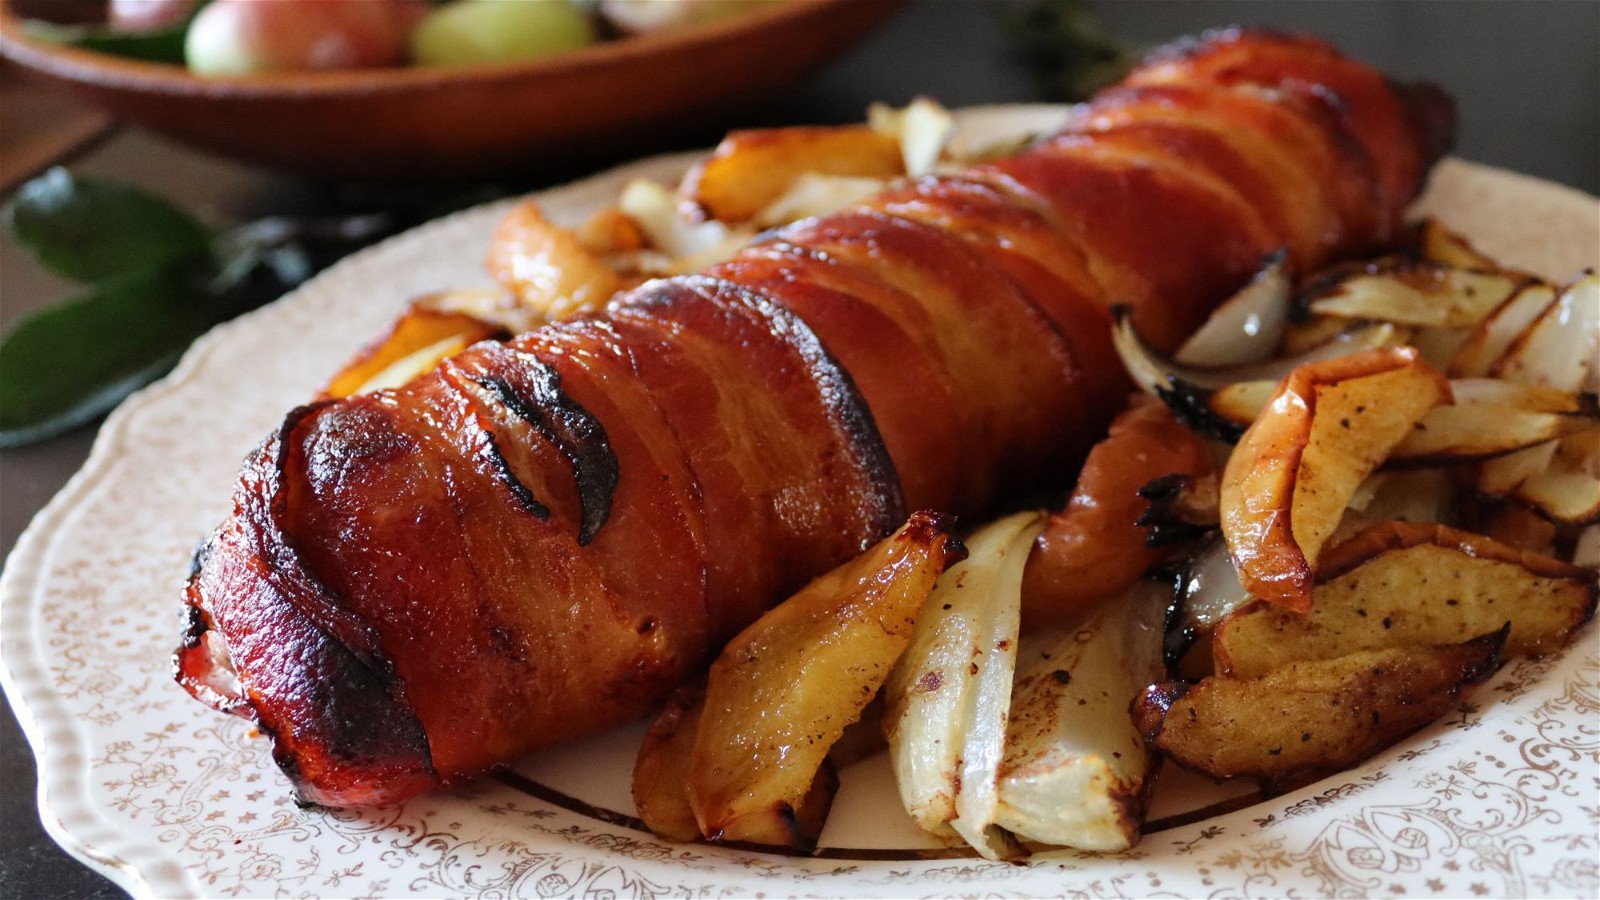 Image of Bacon Wrapped Pork Loin with Roasted Apples